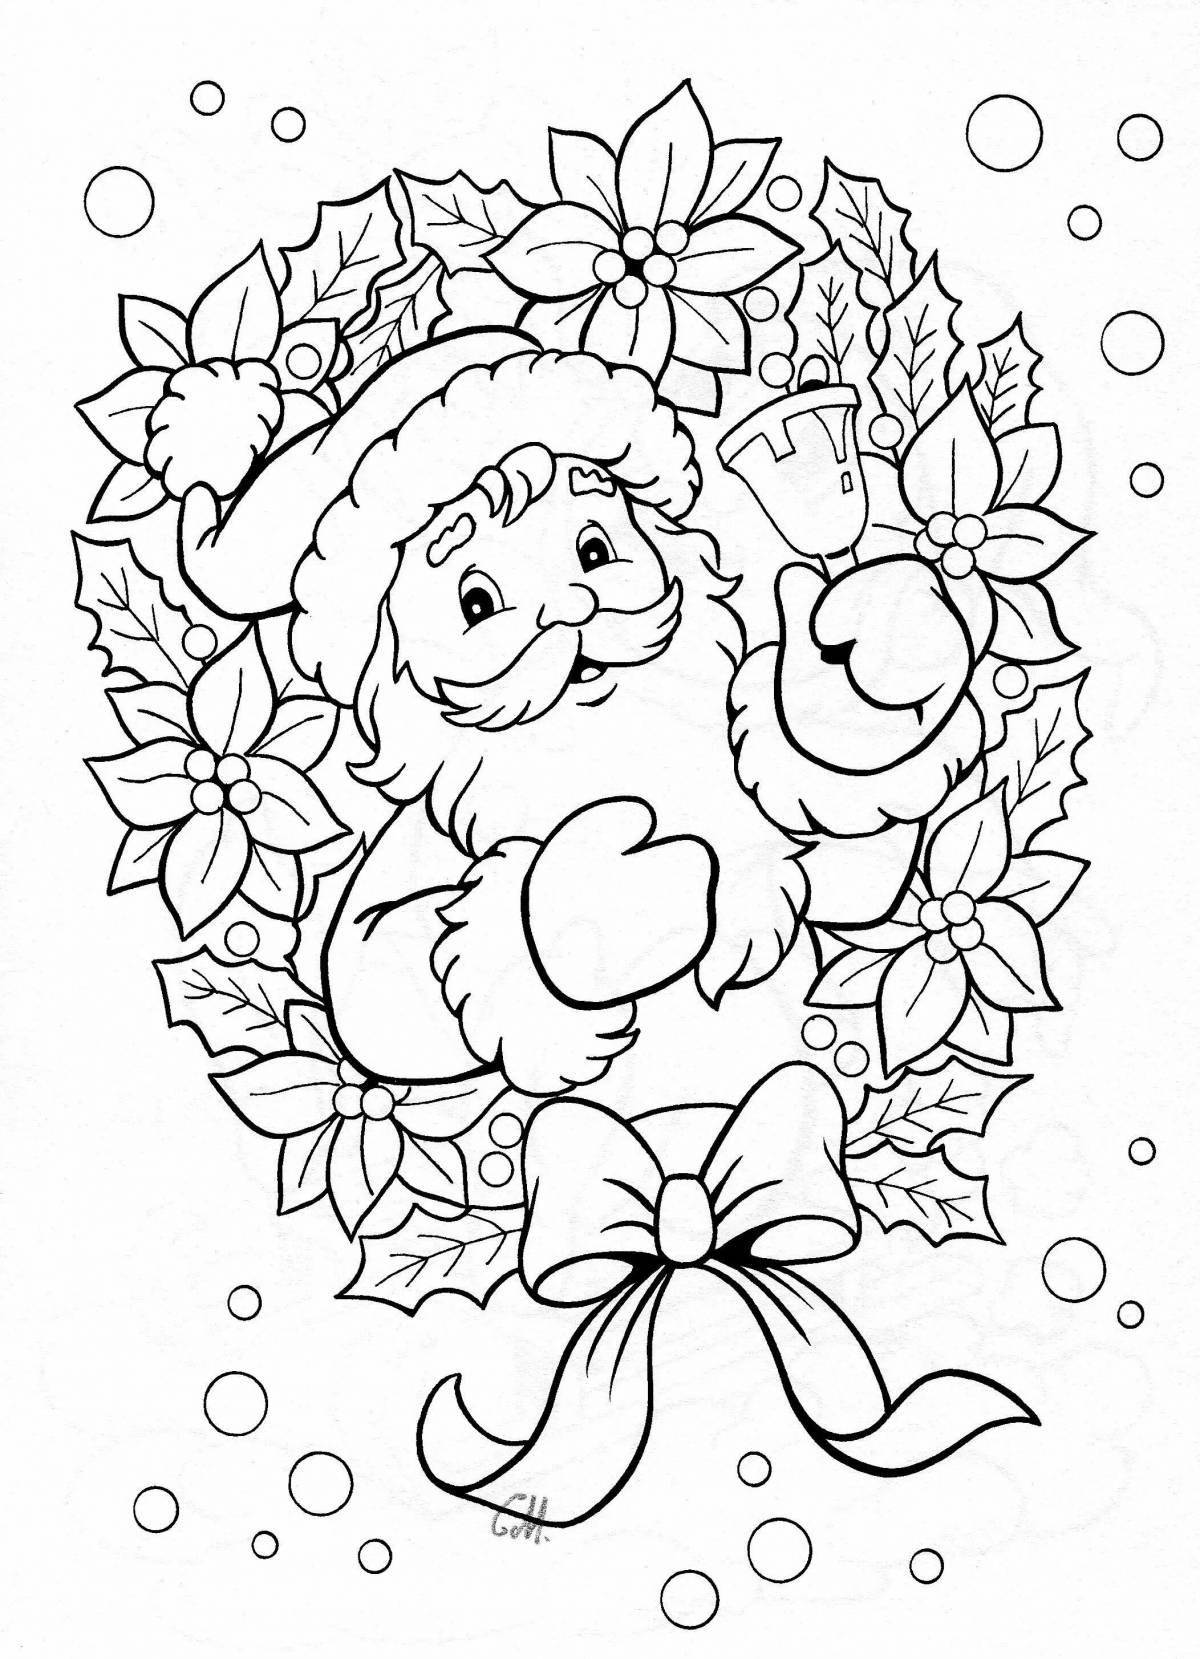 Riotous coloring christmas card for kids